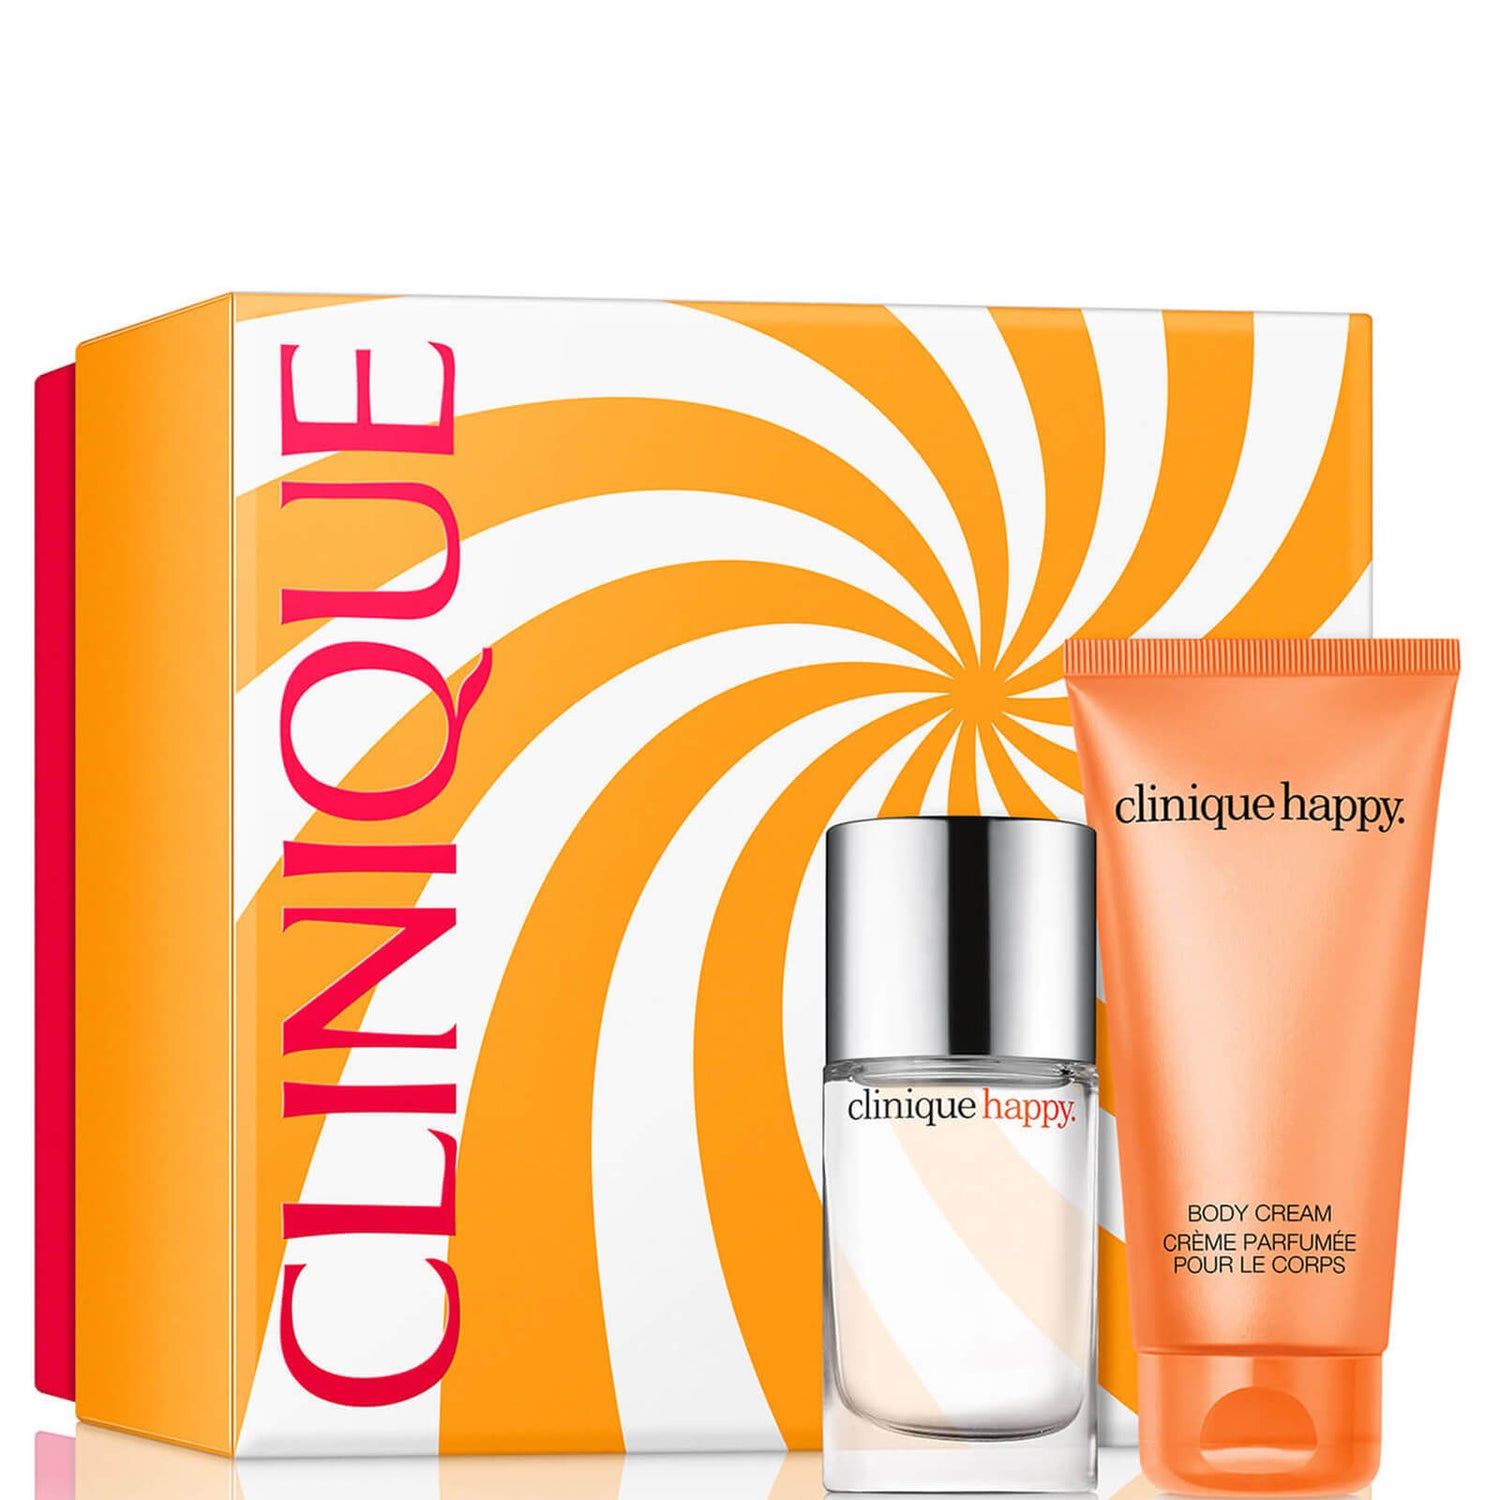 Clinique Have a Little Happy Set (värde £30.00)